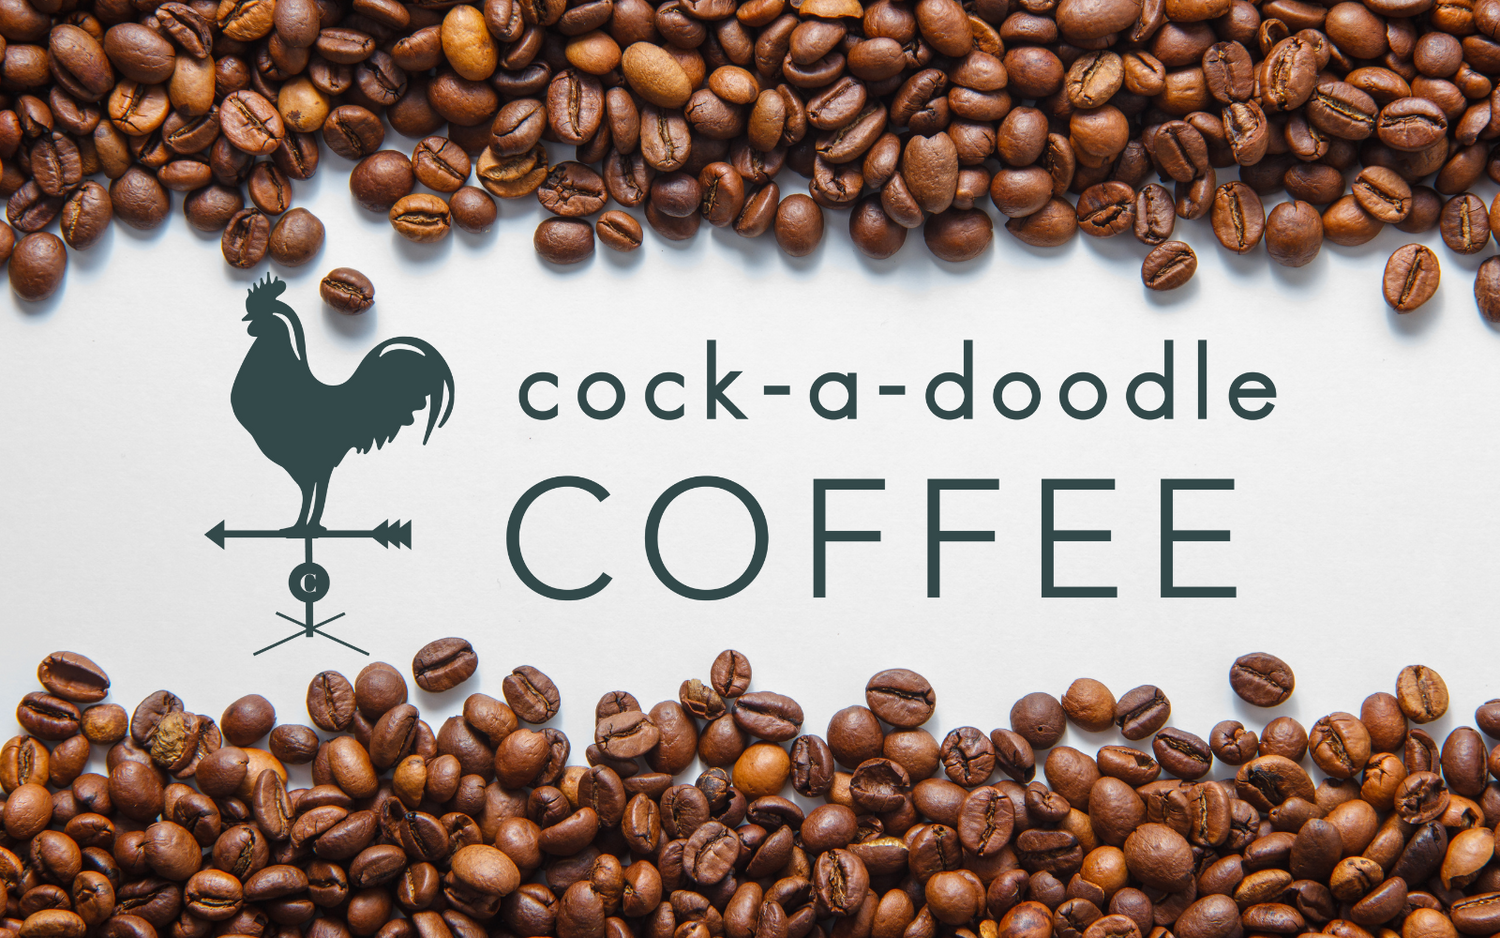 Cock-A-Doodle Coffee is an artisan coffee roaster using coffee roasting best practices to produce fresh small batch roasted coffee.  We sell light medium and dark roast coffee.  Our special roast coffee comes in ground beans and whole beans.